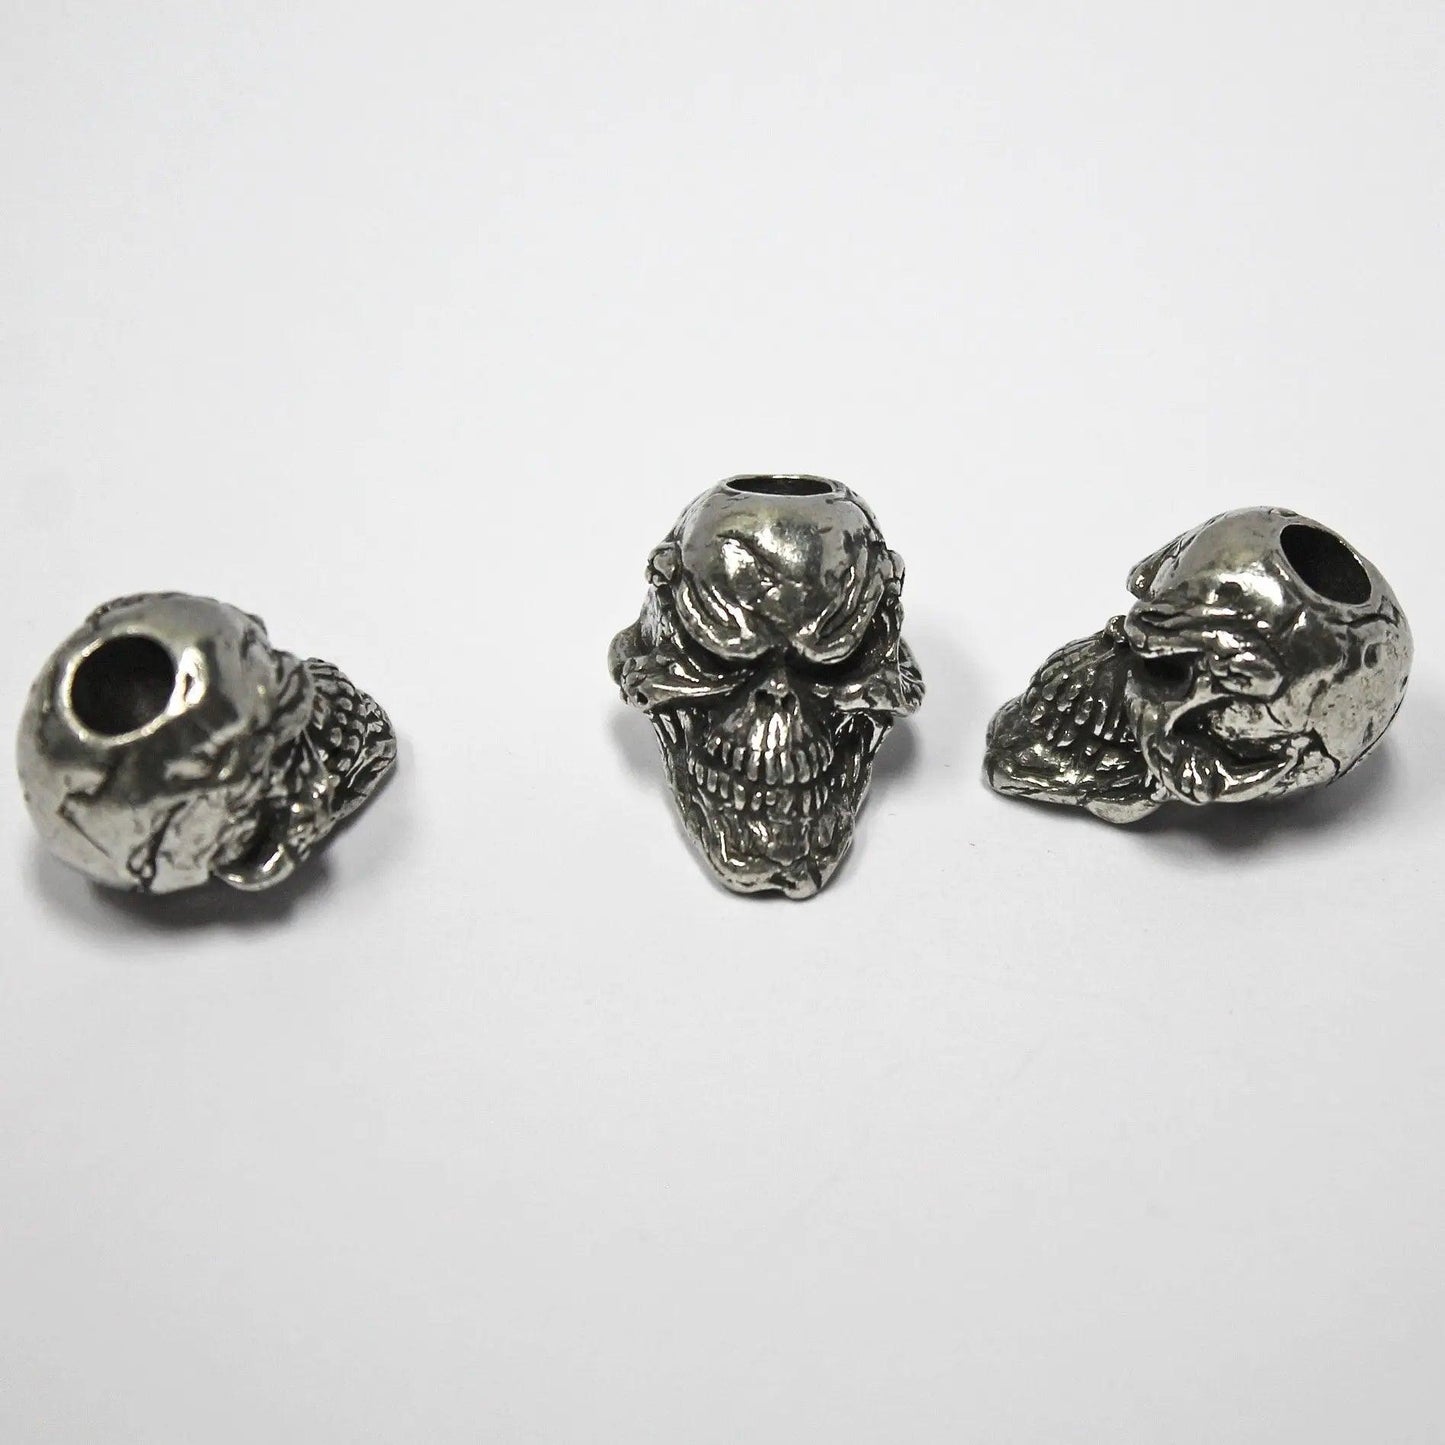 Schmuckatelli Pewter Grins Skull Bead USA Made (1 Pack)  paracordwholesale